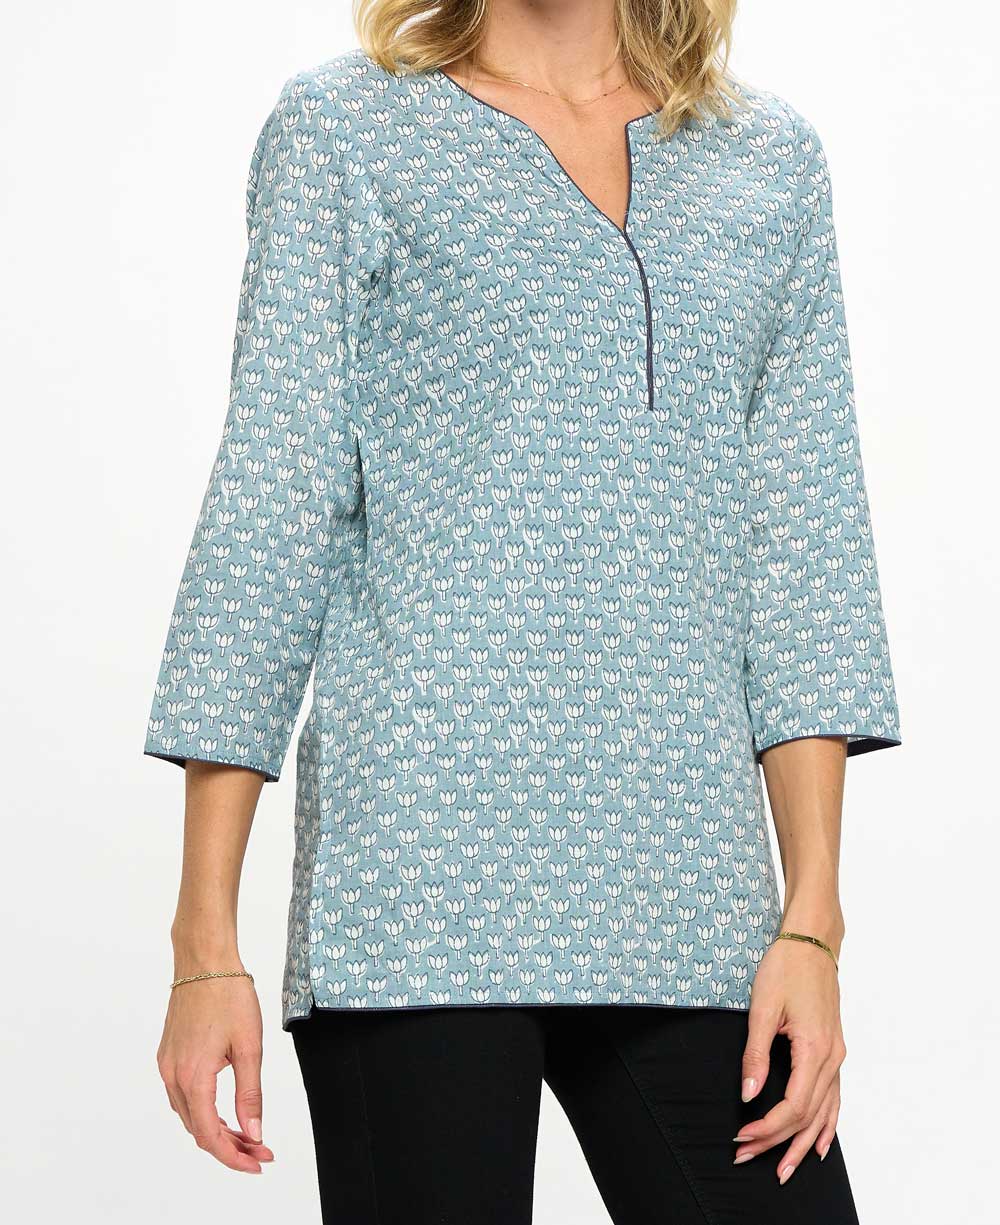 Lotus Floral Tunic - Shirts & Tops S